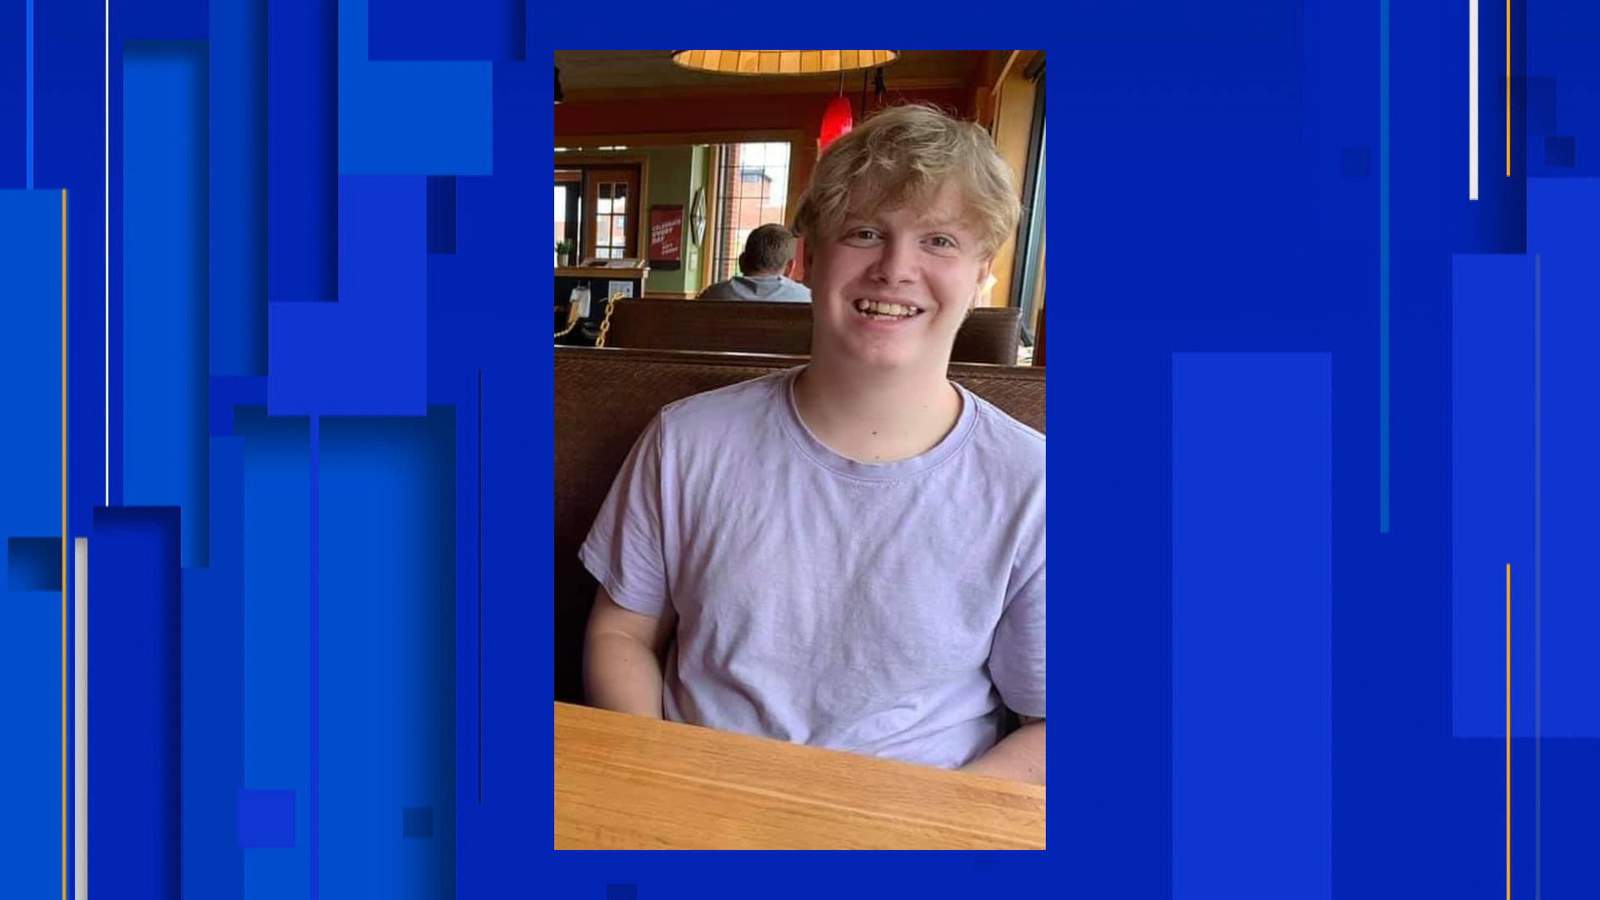 Romulus police looking for 16-year-old boy who has been missing since Oct. 19